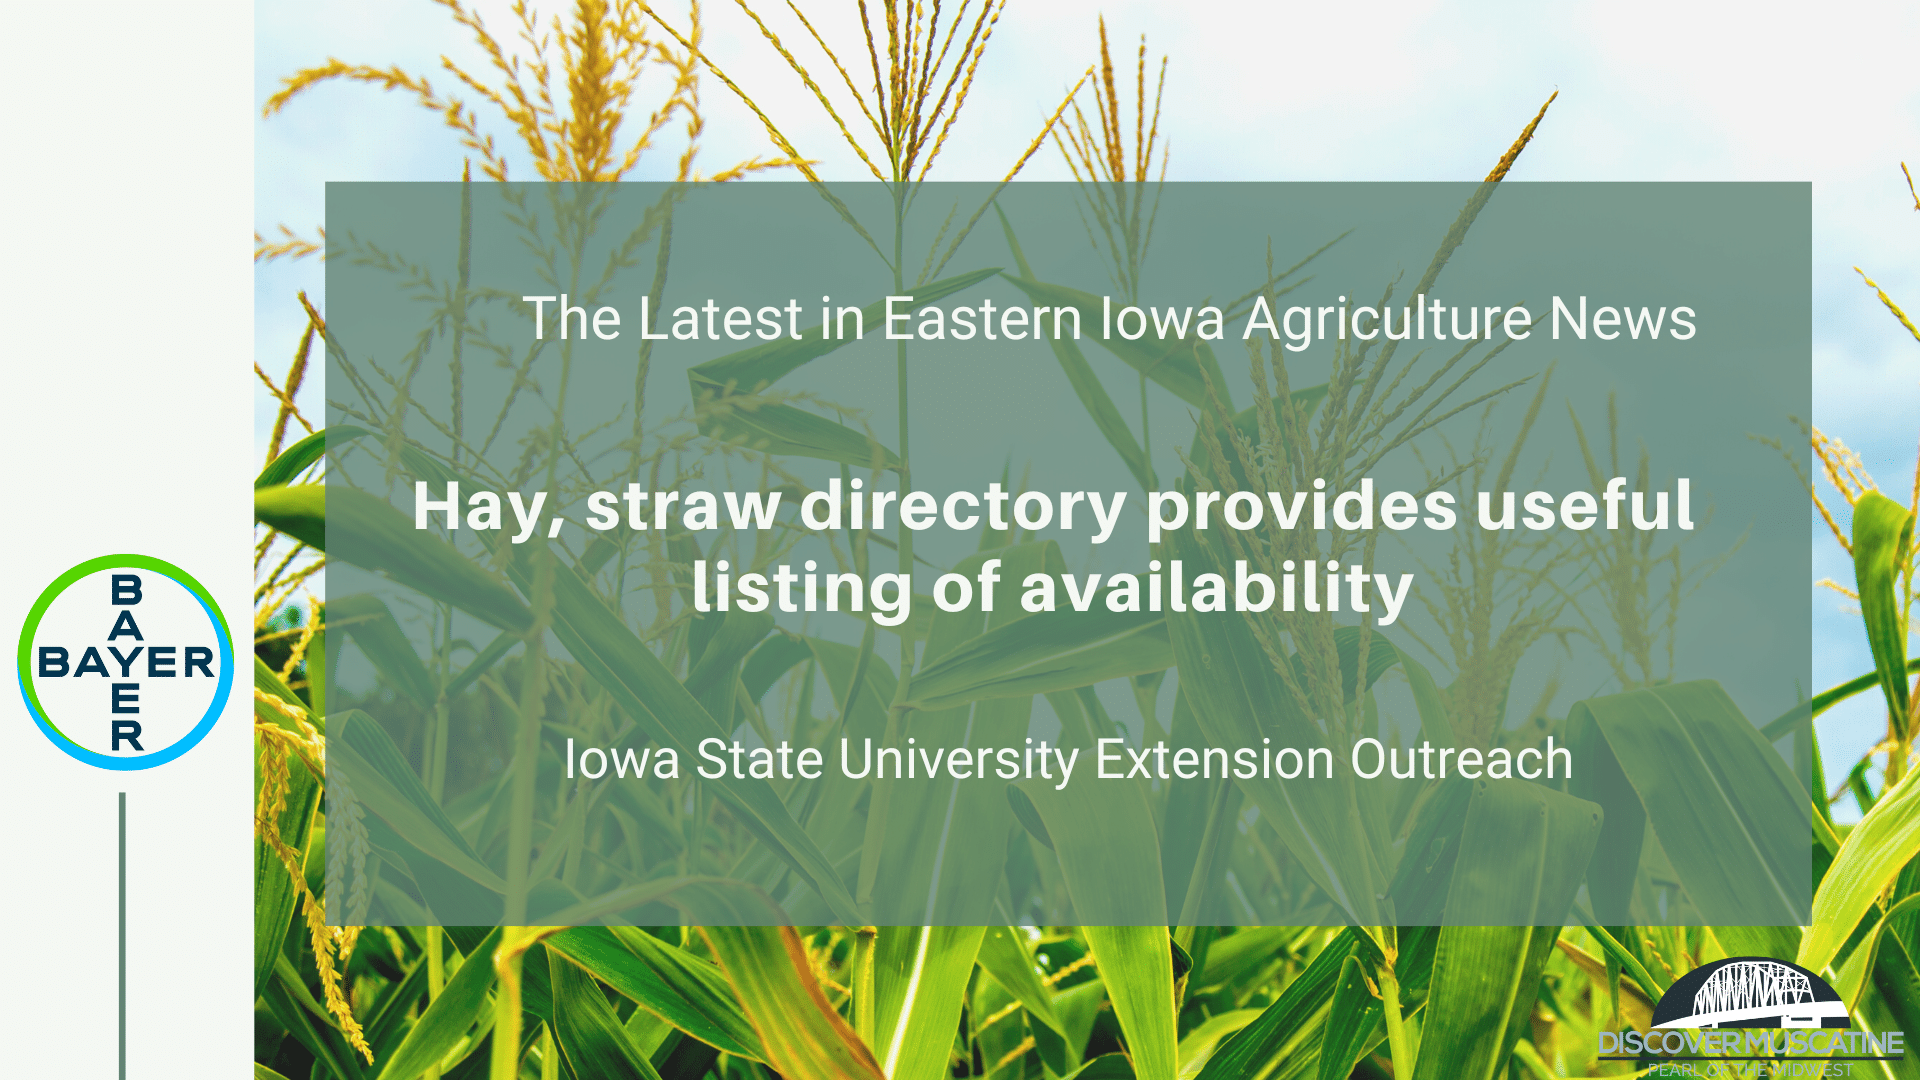 Hay, straw directory provides useful listing of availability